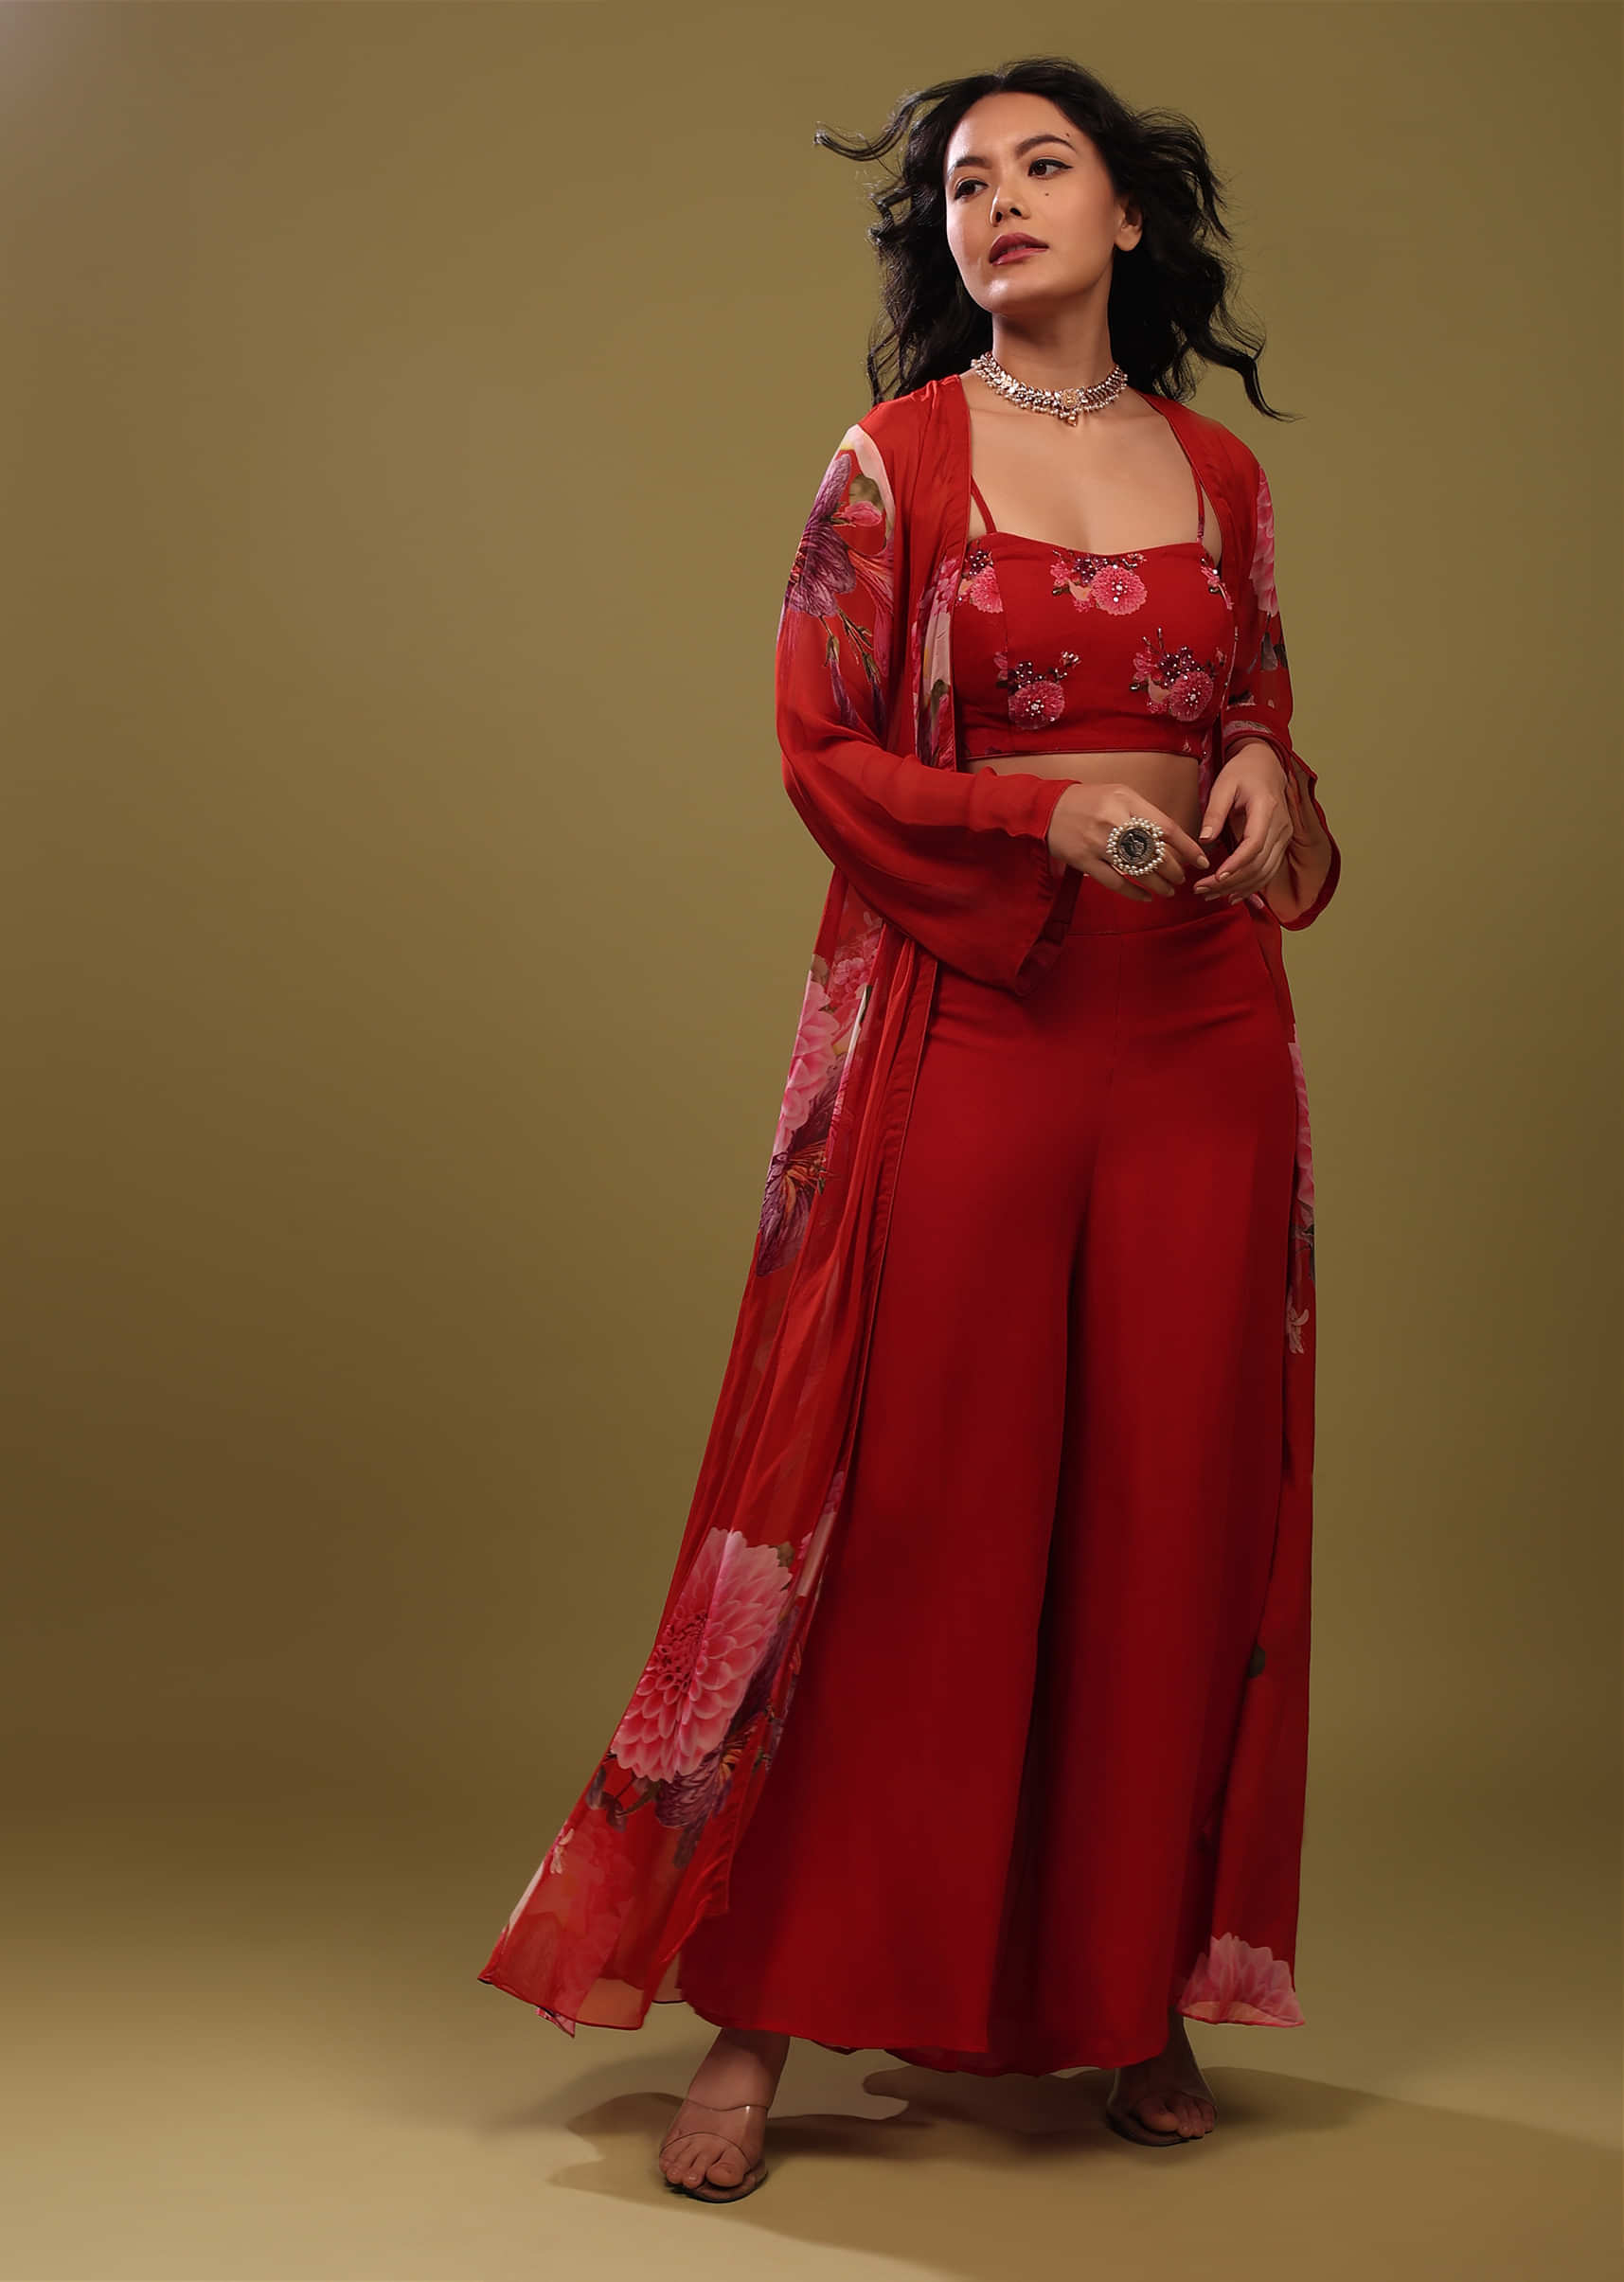 Rose Red Palazzo Top Set With Shrug In A Breezy Floral Print And Embroidery